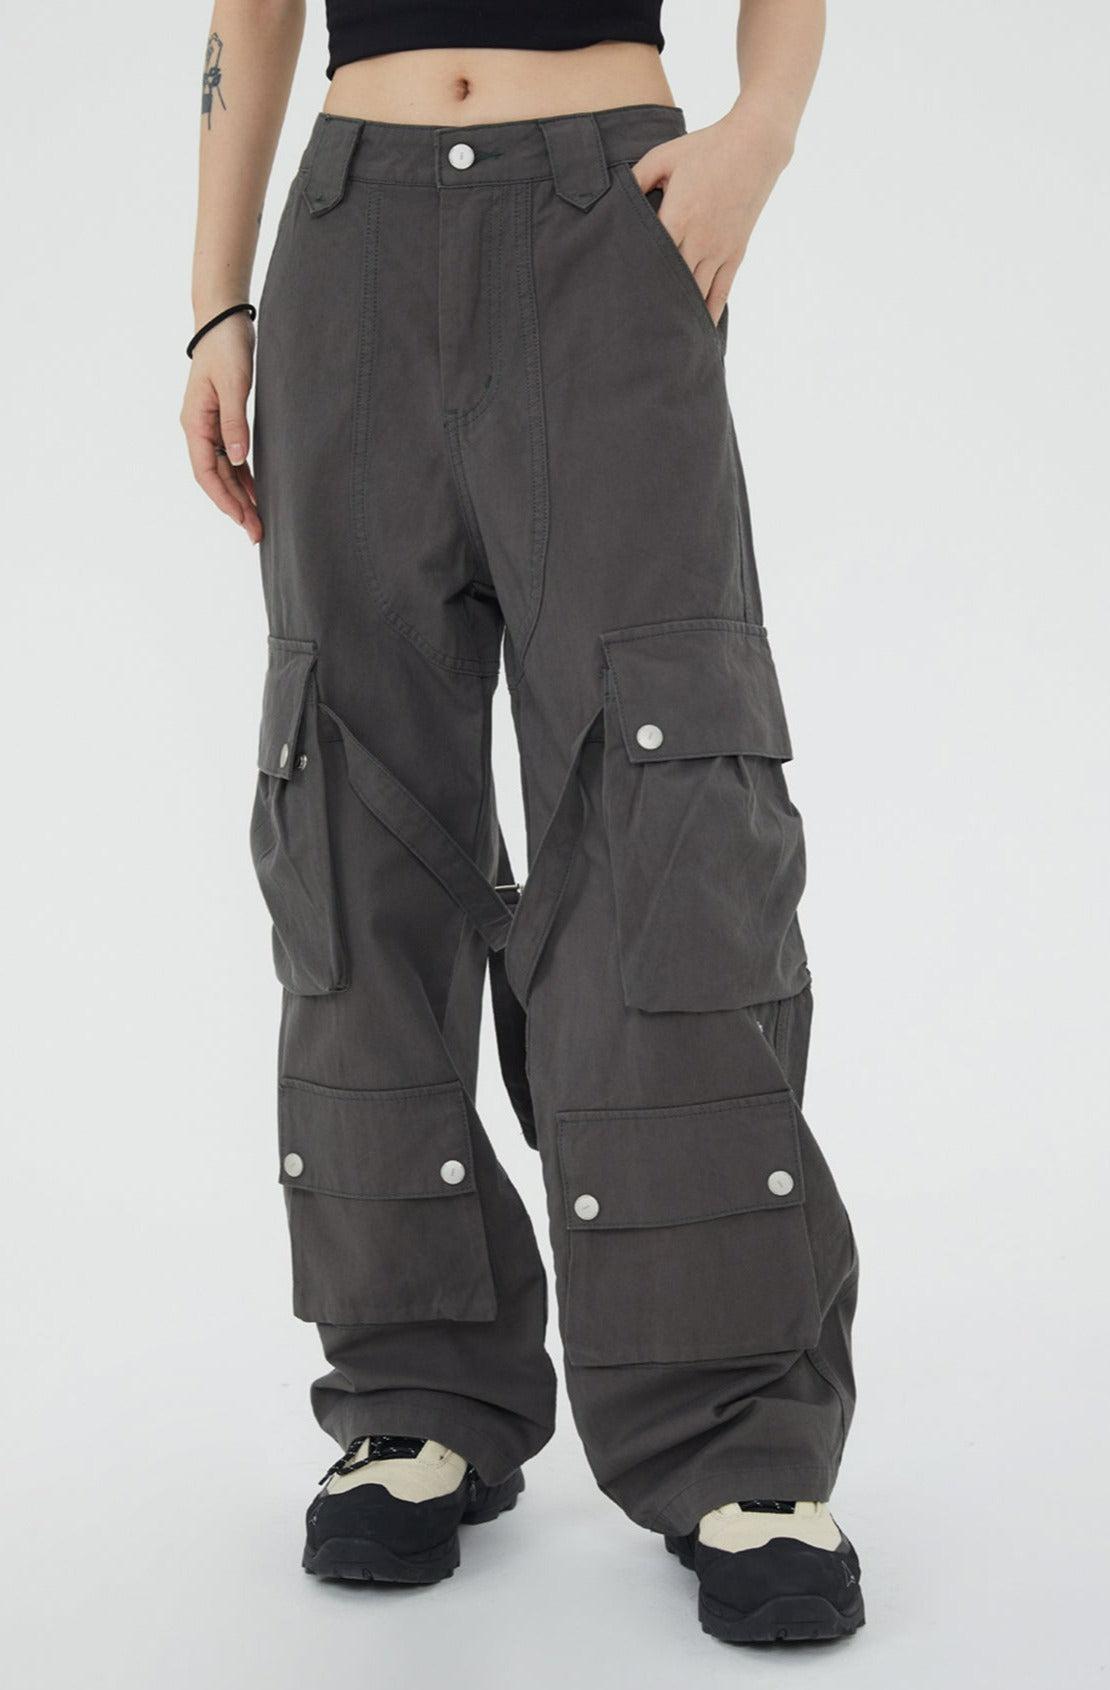 Buckle Strap Button Detailed Cargo Pants Korean Street Fashion Pants By Made Extreme Shop Online at OH Vault